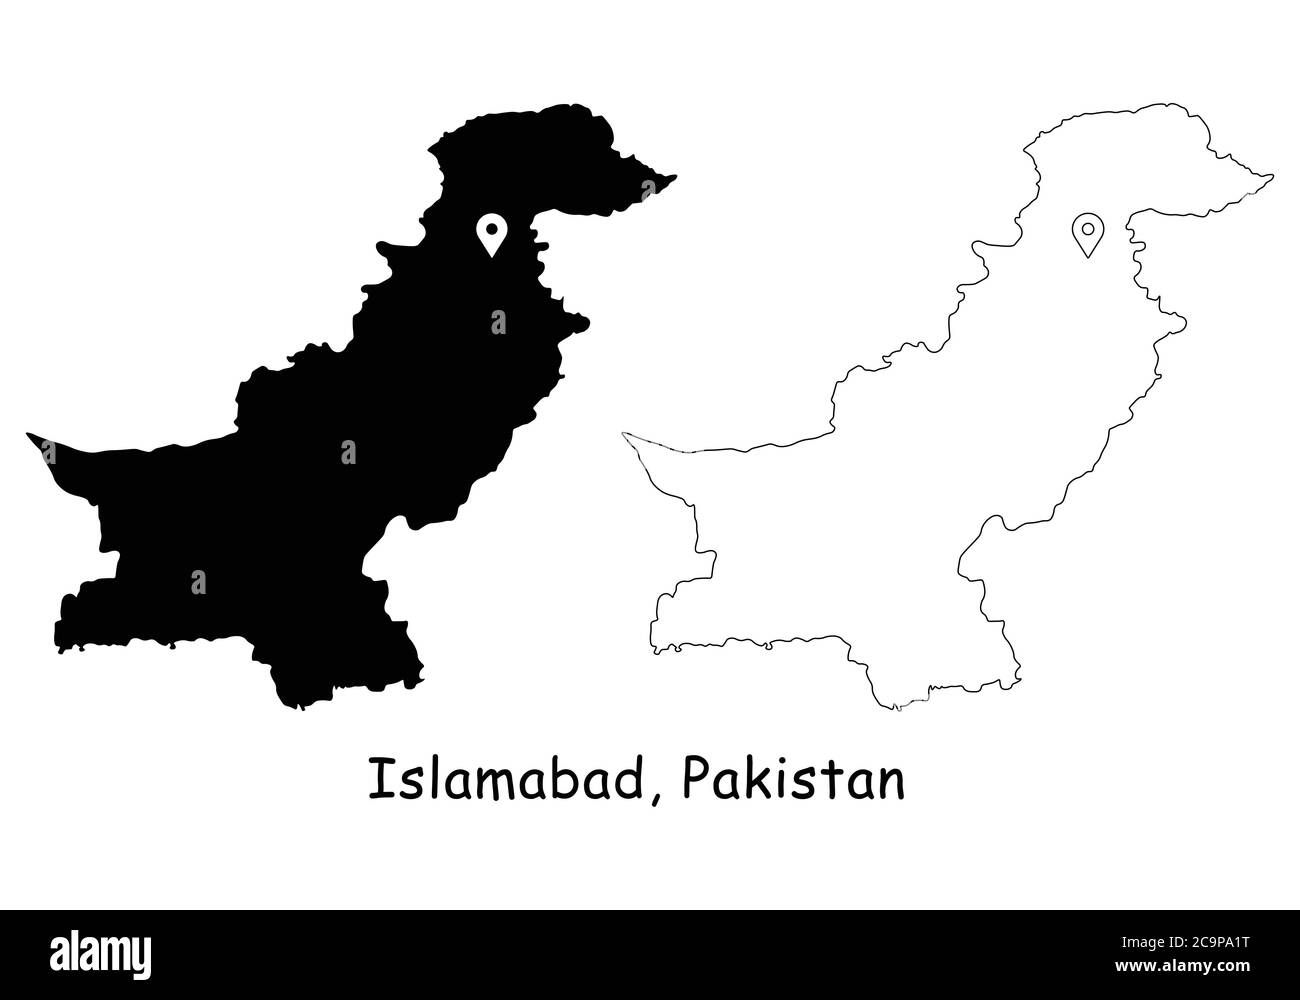 Islamabad, Islamic Republic of Pakistan. Detailed Country Map with Location Pin on Capital City. Black silhouette and outline maps isolated on white b Stock Vector